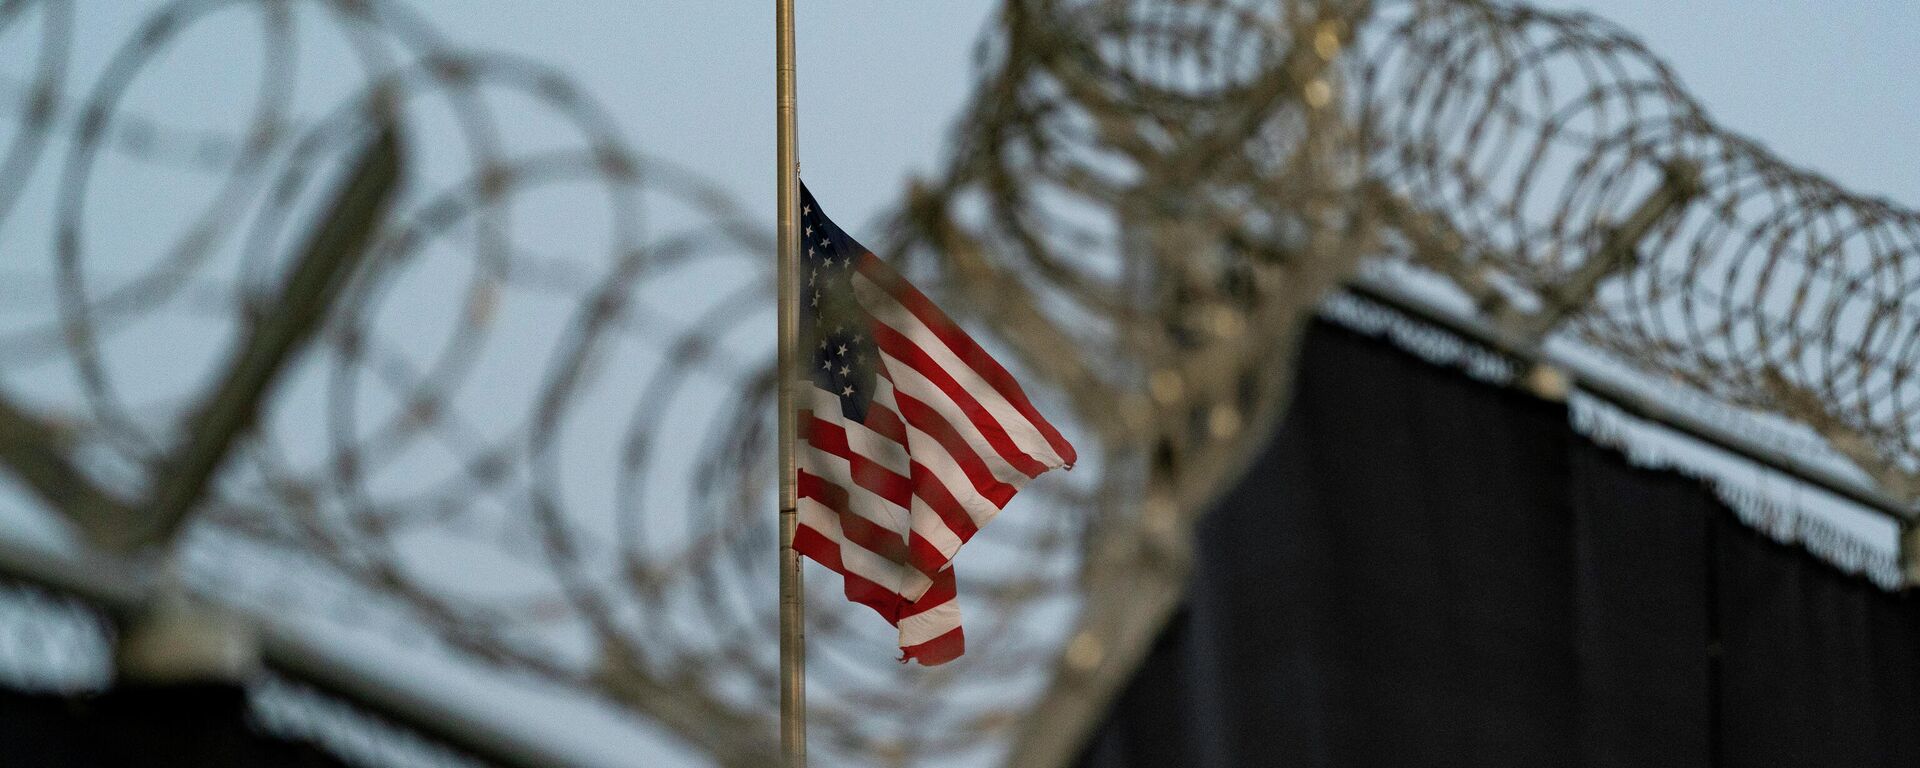 In this Aug. 29, 2021, file photo reviewed by U.S. military officials, a flag flies at half-staff in honor of the U.S. service members and other victims killed in the terrorist attack in Kabul, Afghanistan, as seen from Camp Justice in Guantanamo Bay Naval Base, Cuba. - Sputnik India, 1920, 25.05.2023